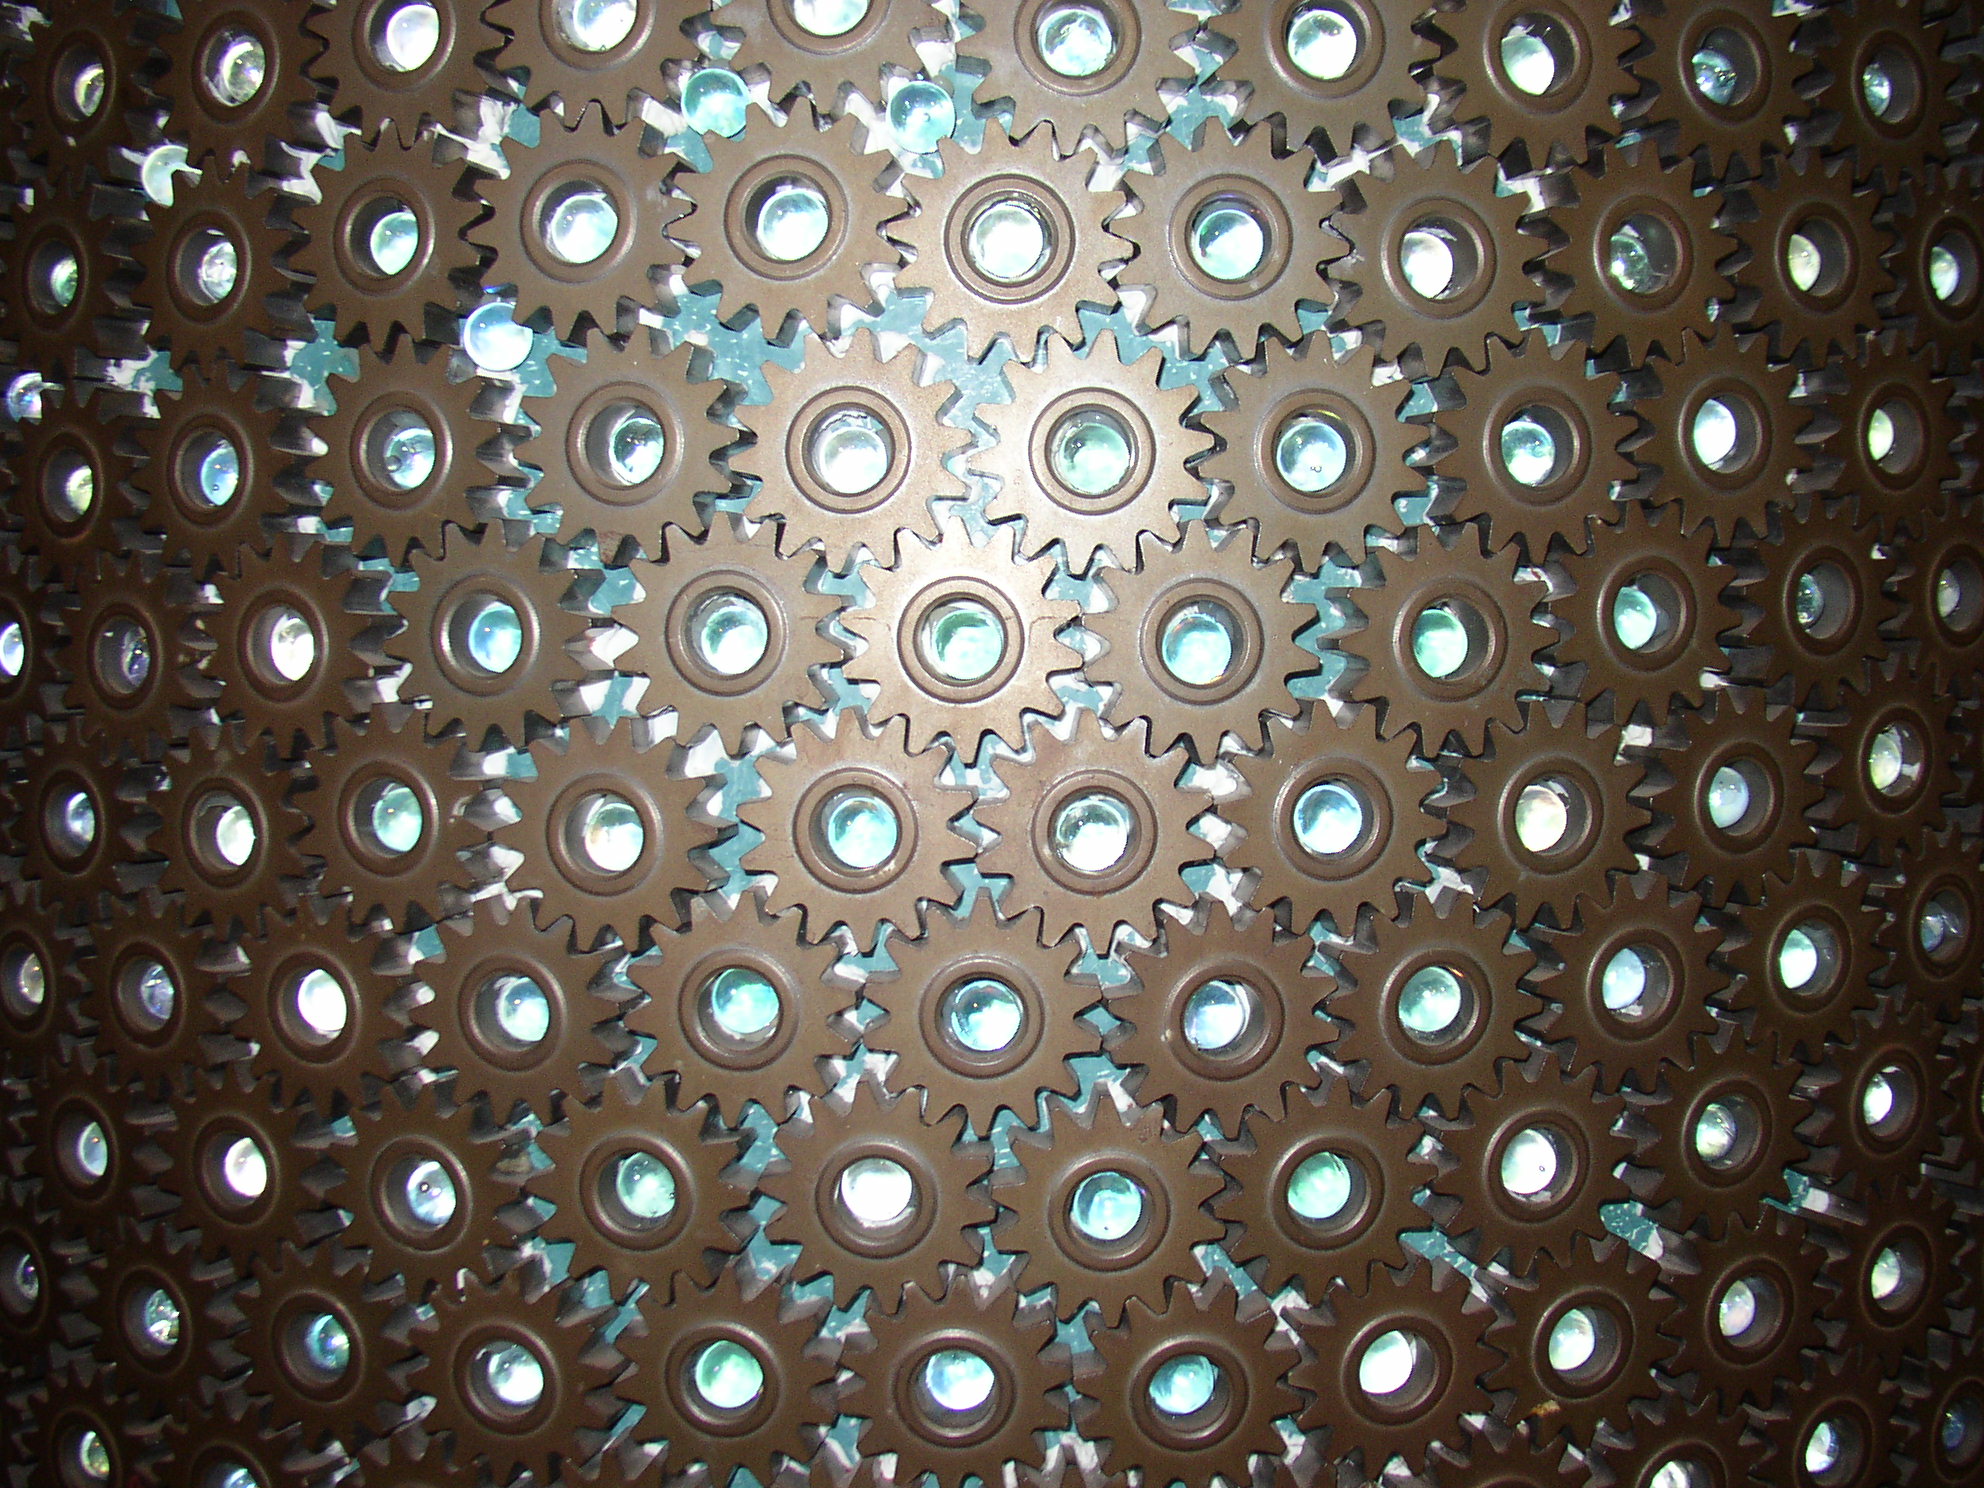 Gear texture image